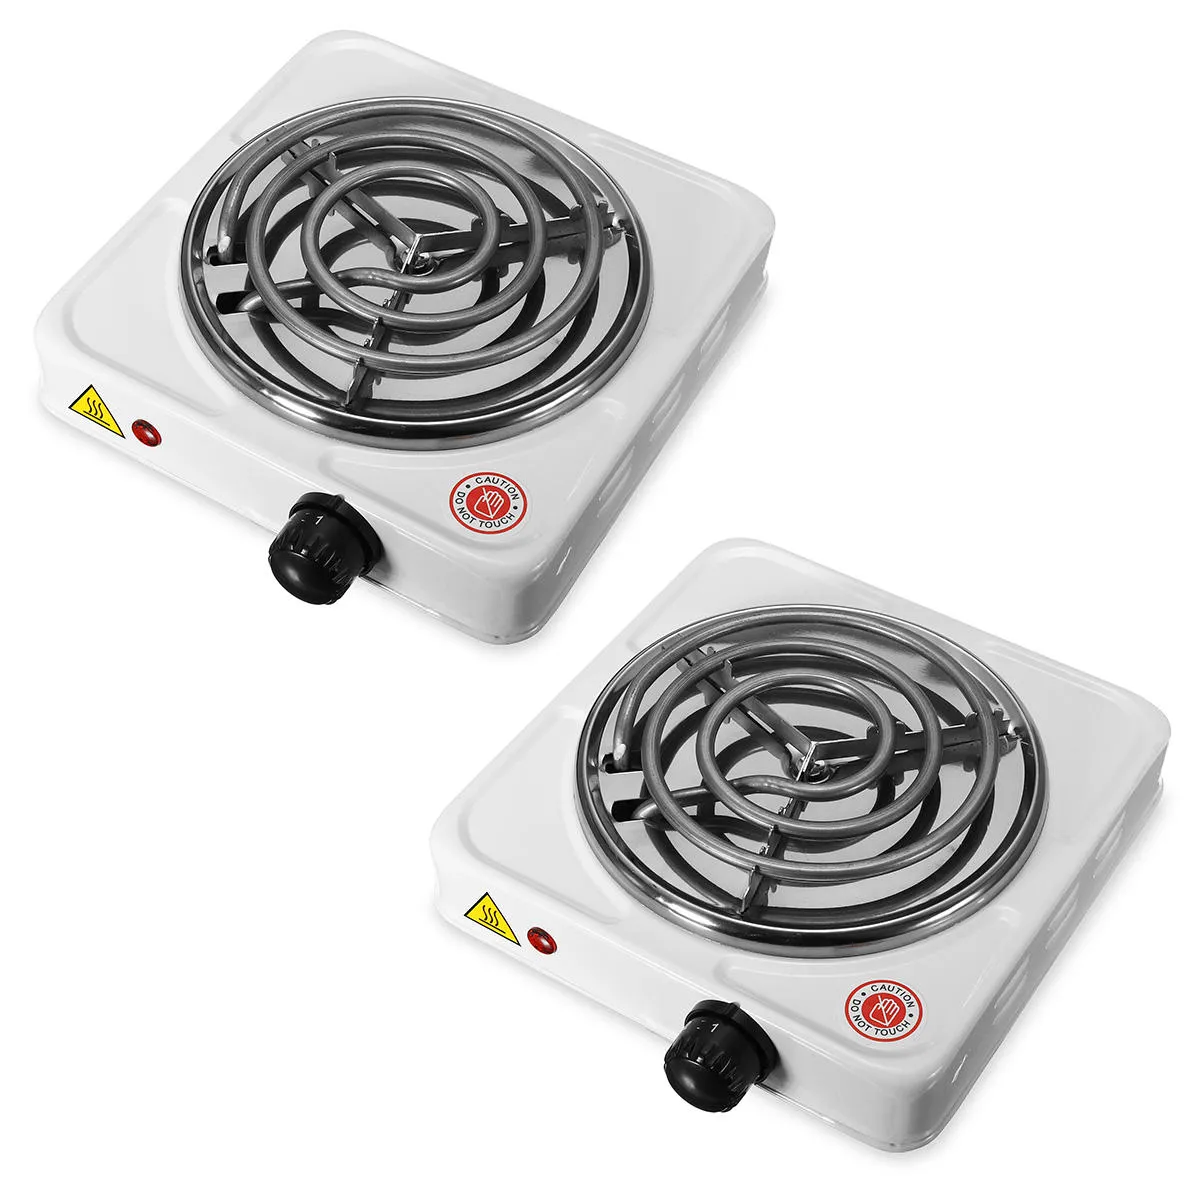 Portable 1000W Electric Hot Plate Burner For Travel Cooking Ideal